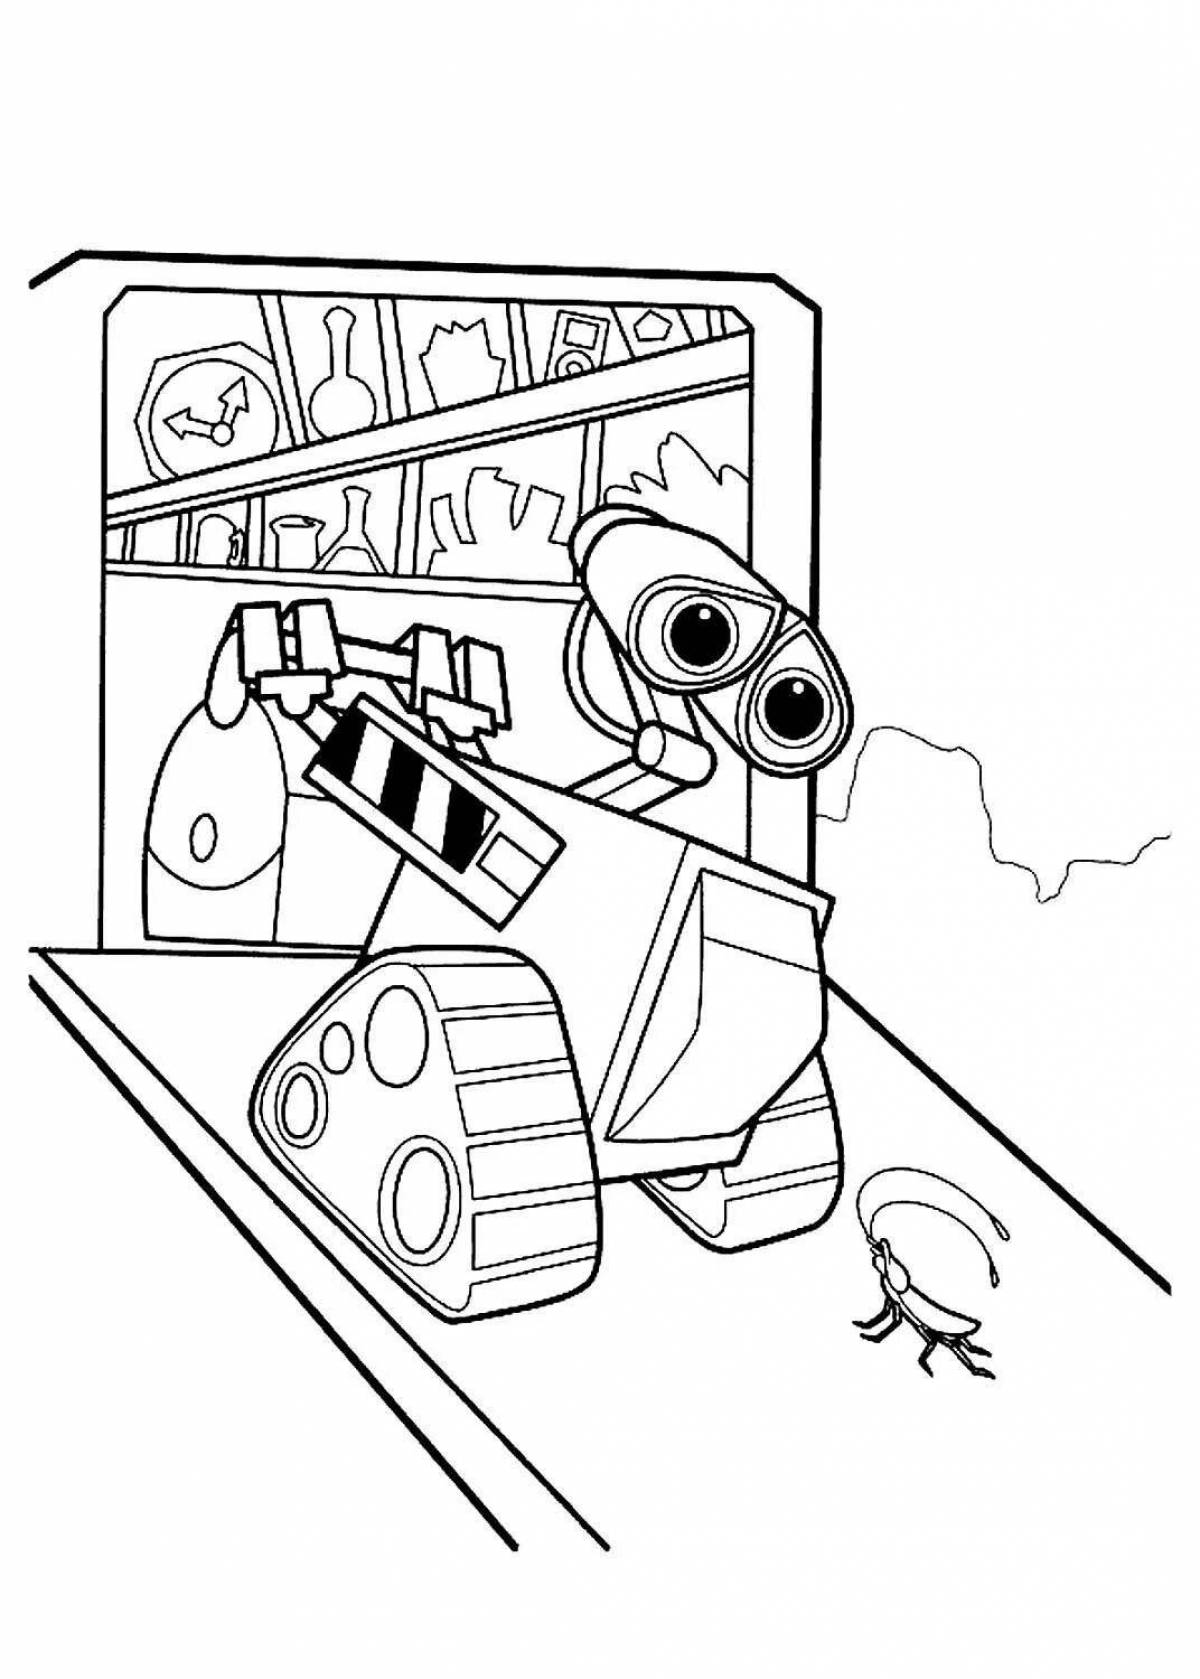 Colorful robot valley coloring page